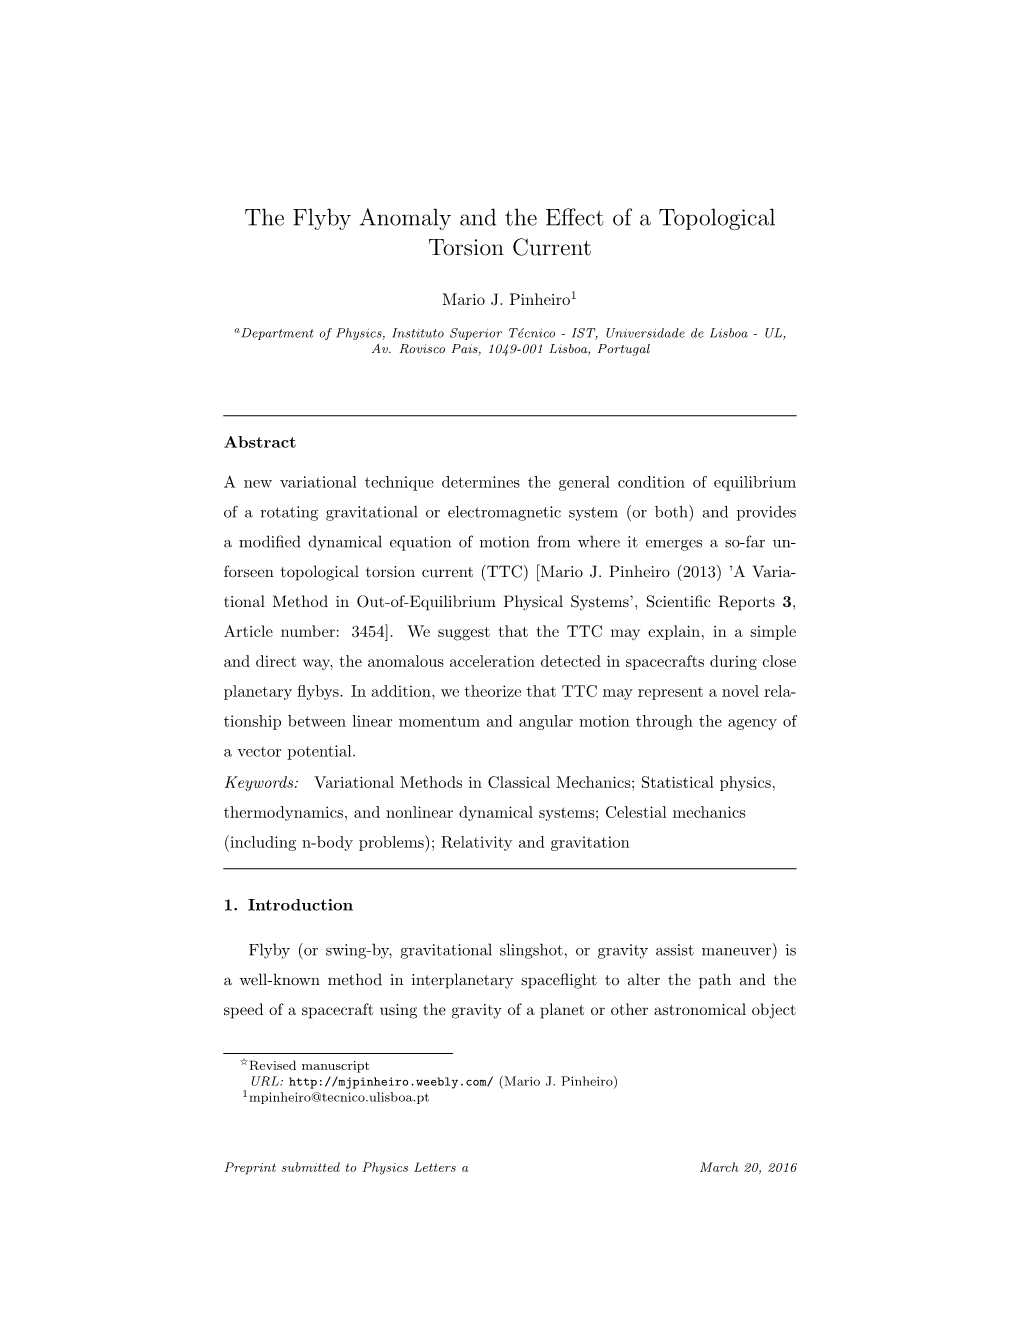 The Flyby Anomaly and the Effect of a Topological Torsion Current